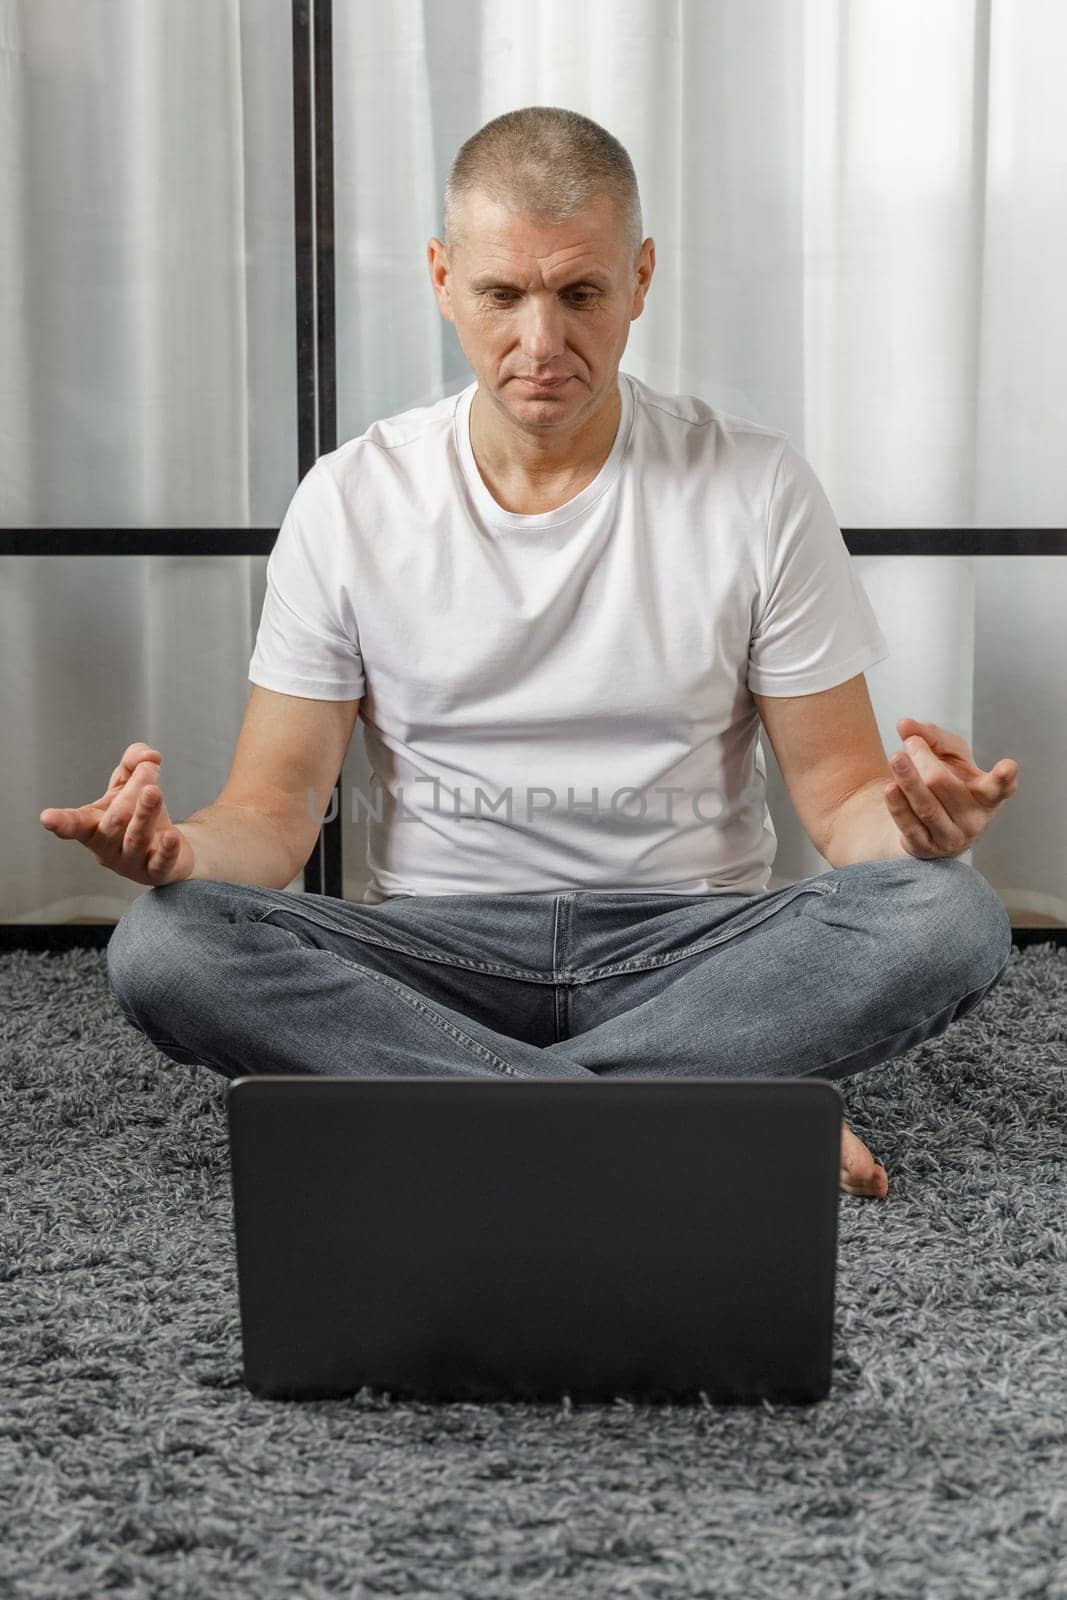 A middle-aged man conducts remote training in yoga, psychosomatics. by Sd28DimoN_1976